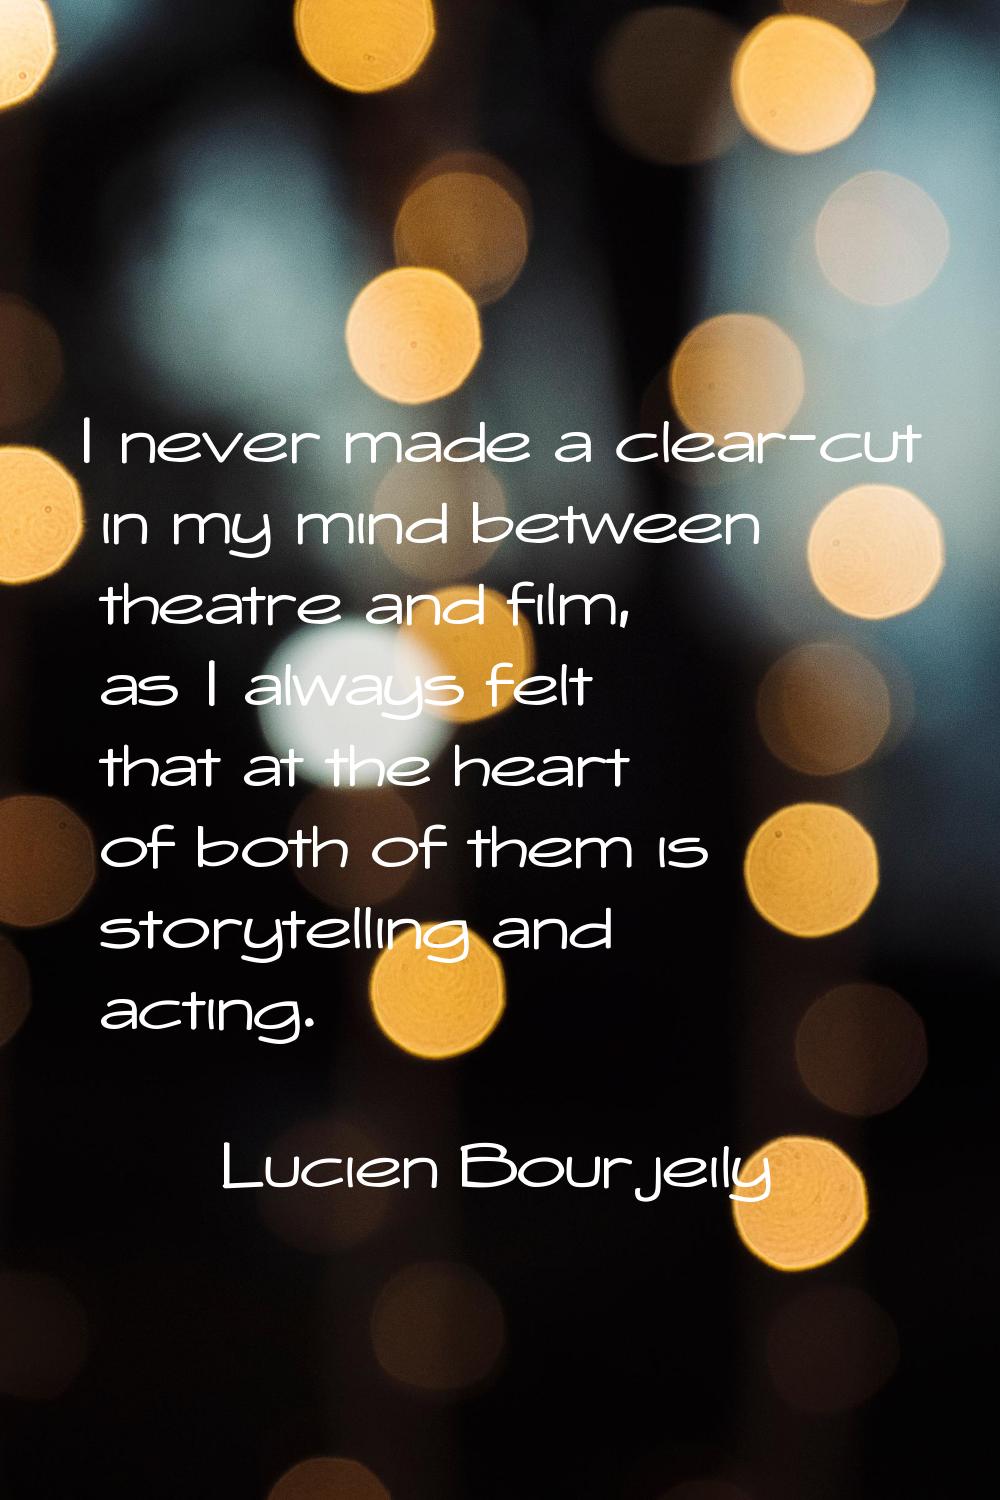 I never made a clear-cut in my mind between theatre and film, as I always felt that at the heart of